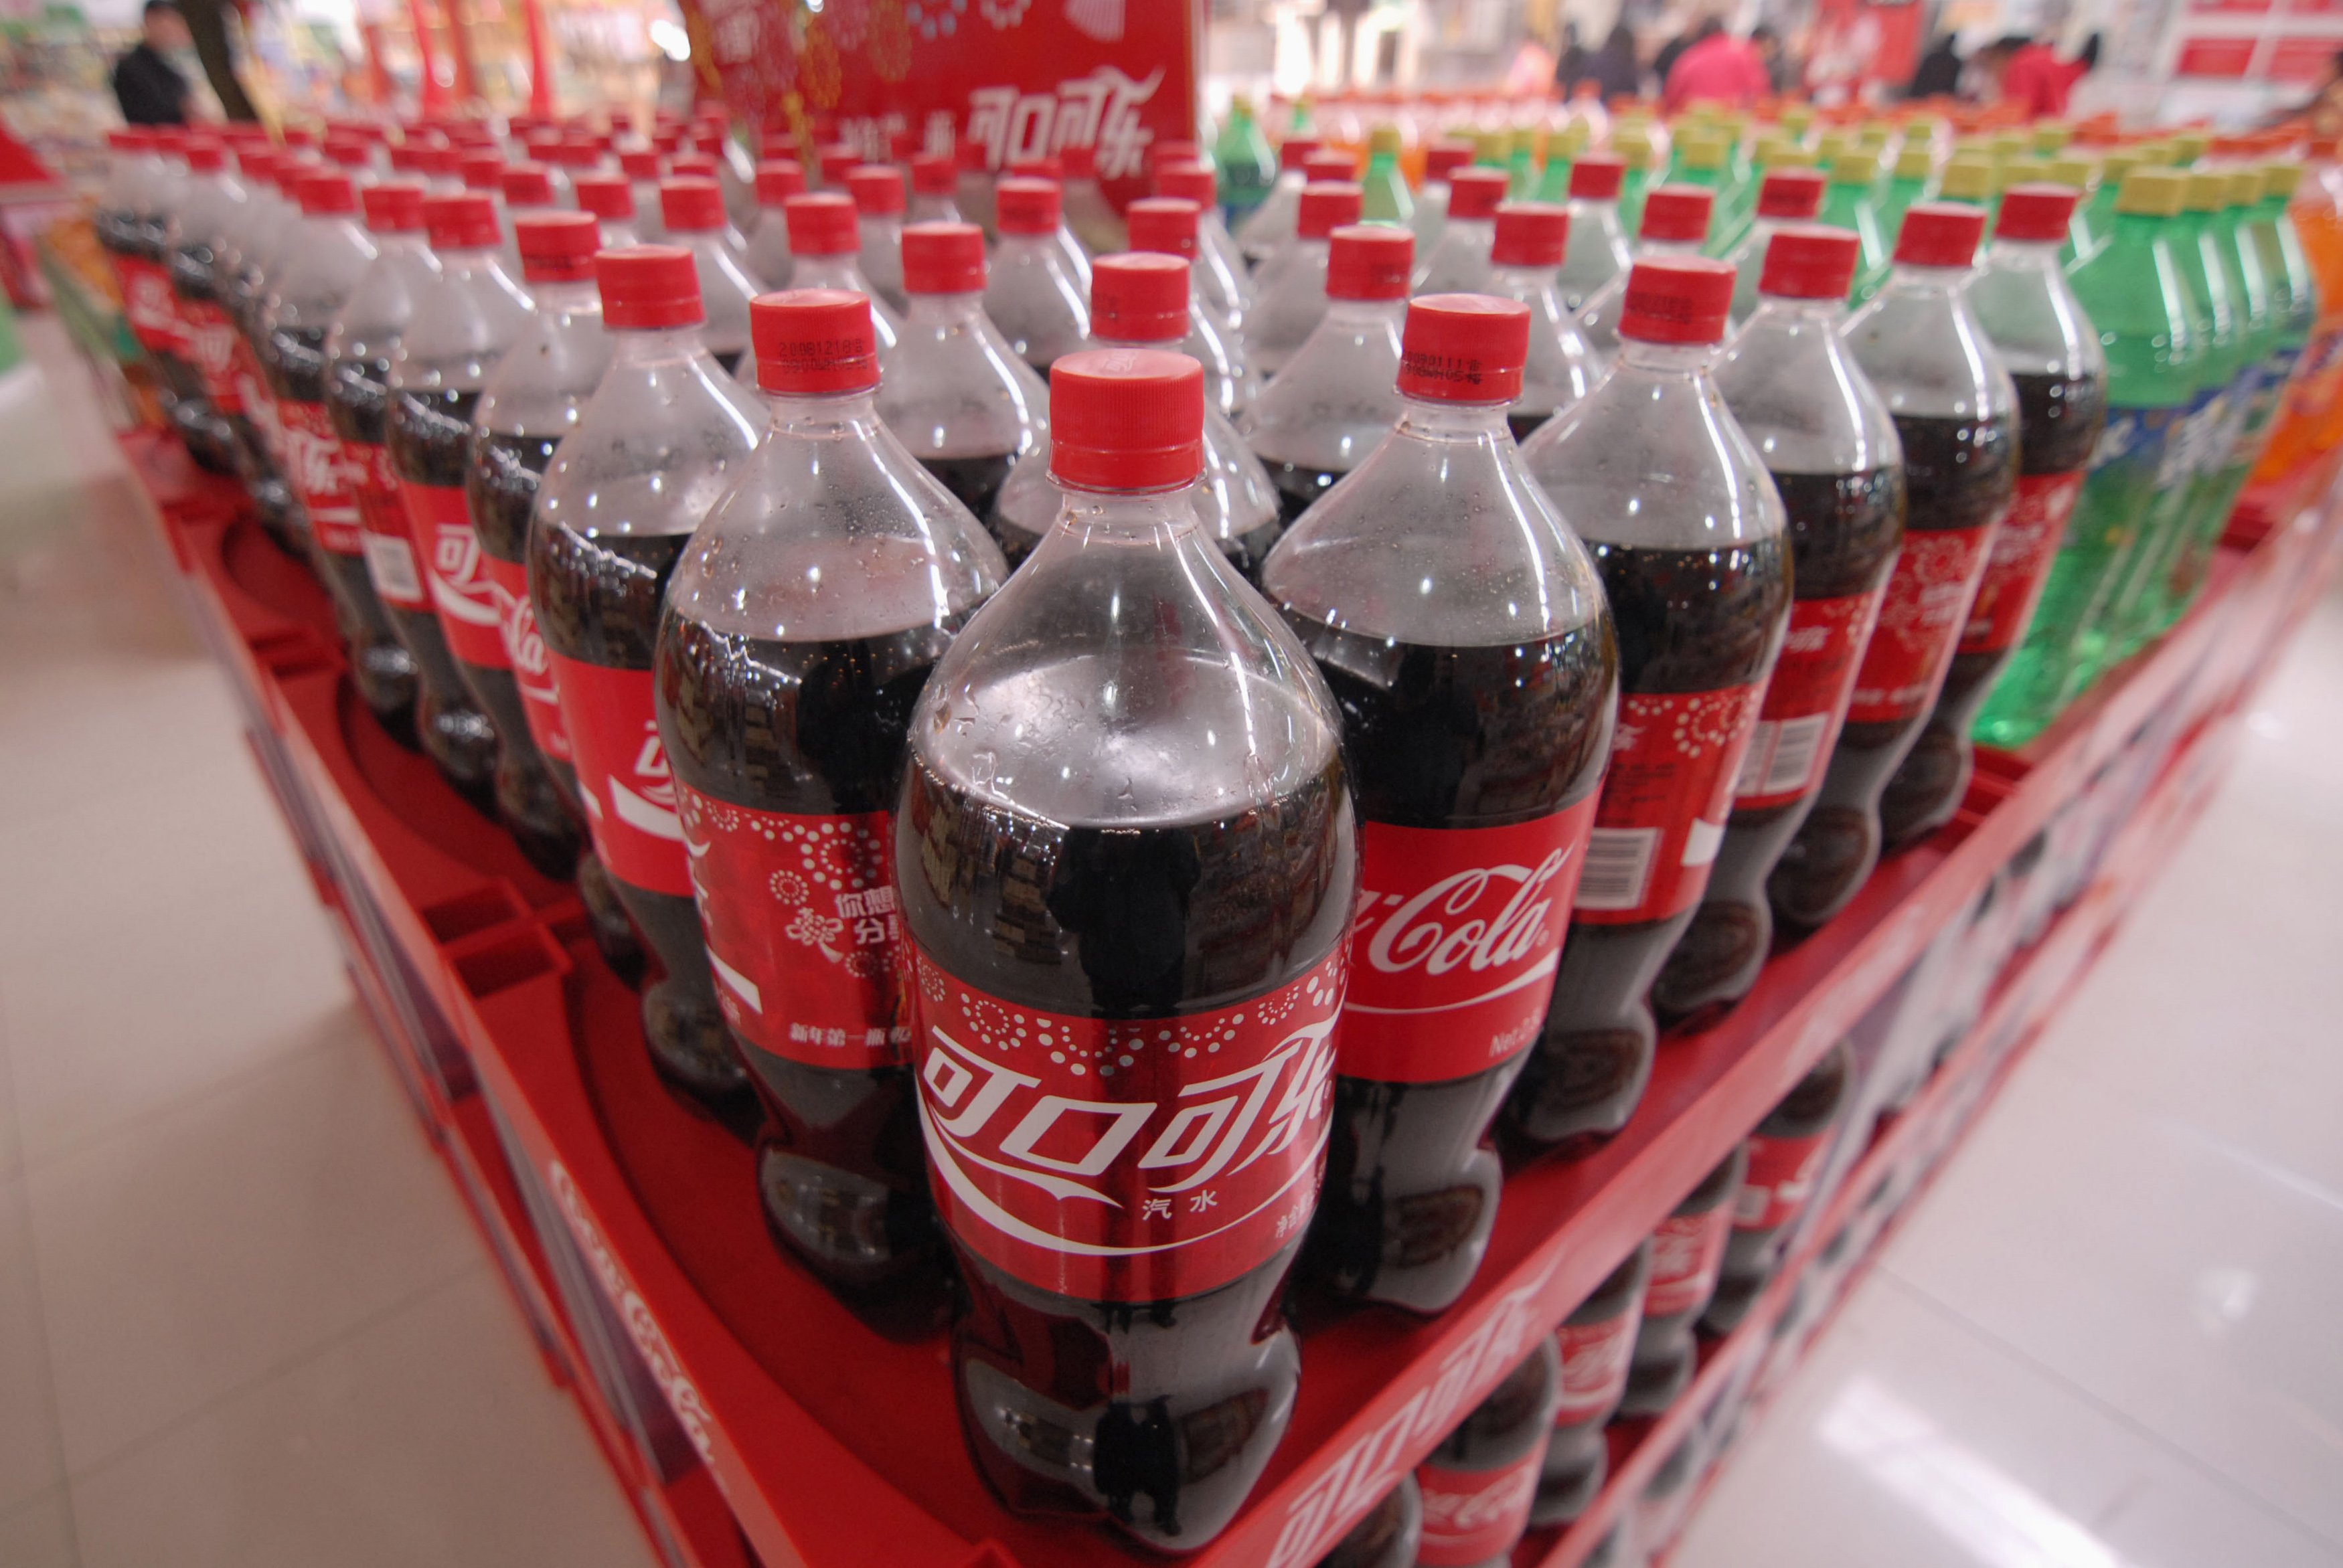 Coca-Cola says it uses GPS devices to improve efficiency. Photo: Reuters